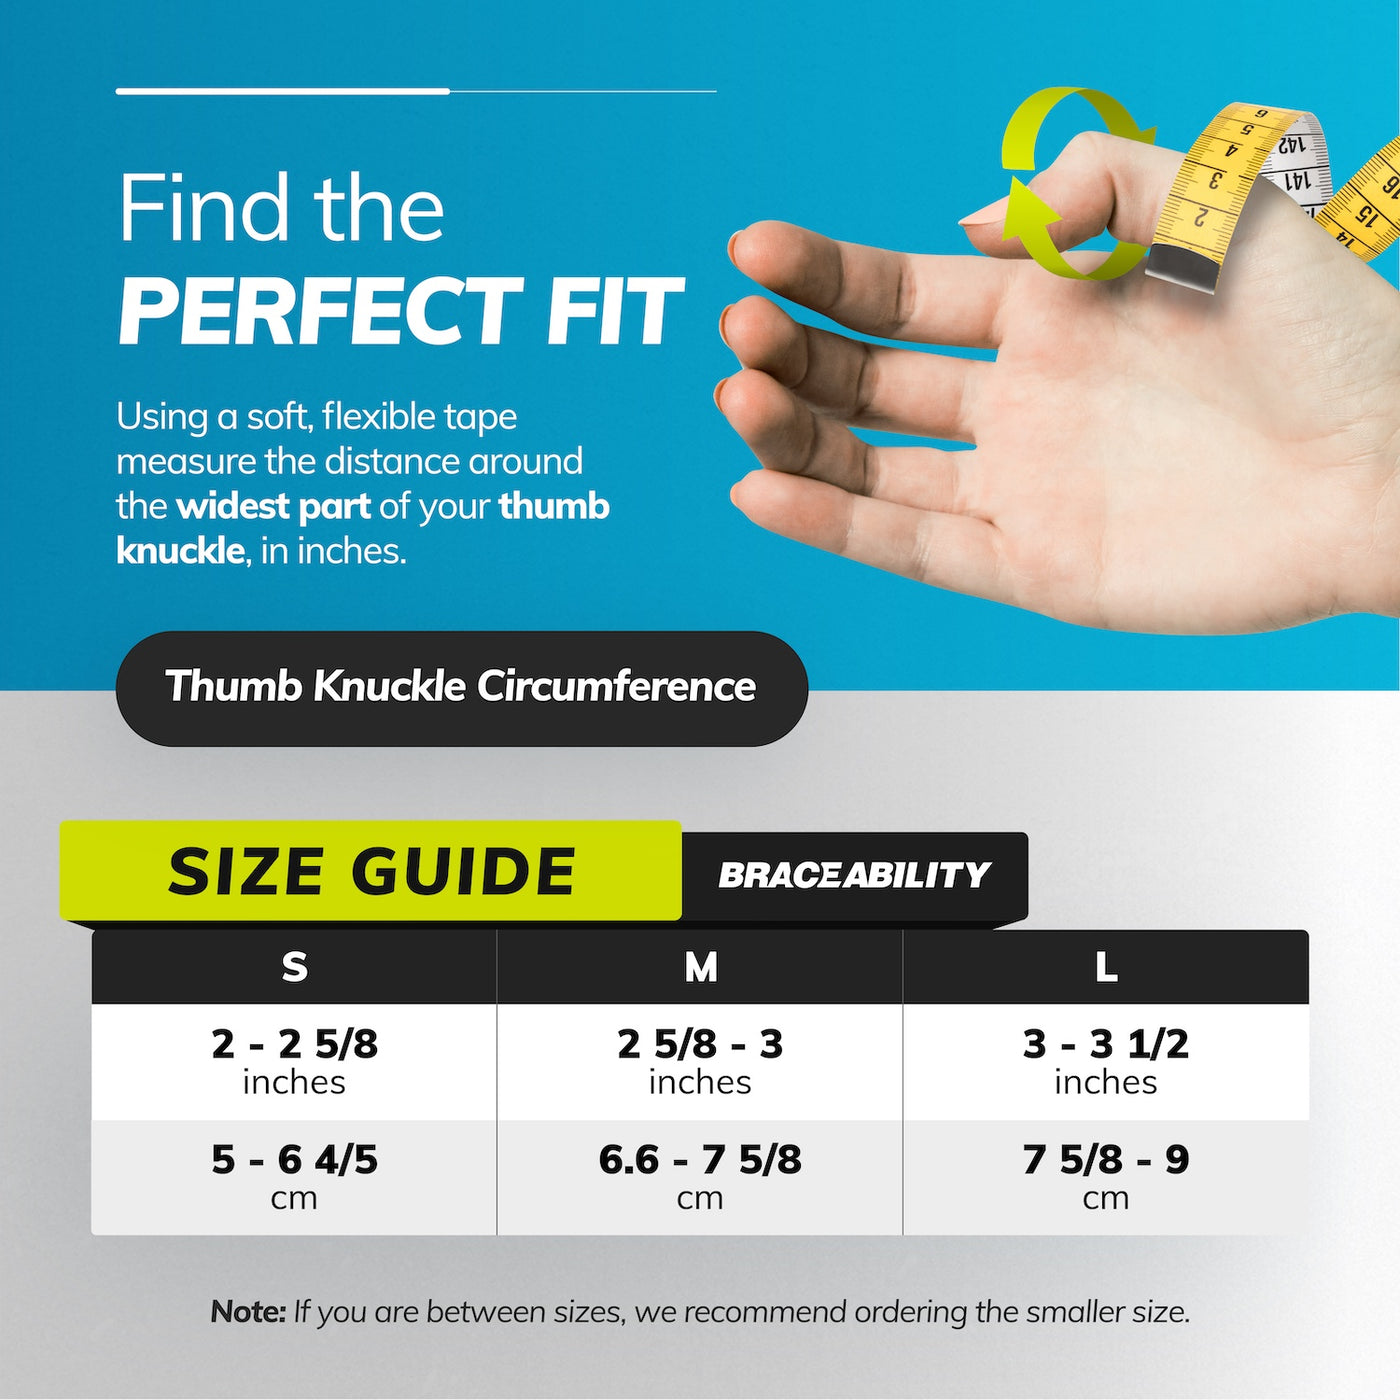 The sizing chart for the hard thumb arthritis brace - measure the circumference around your thumb knuckle. S fits 2"-2 5/8, M fits 2 5/8"-3" and L fits 3"-3 1/2"